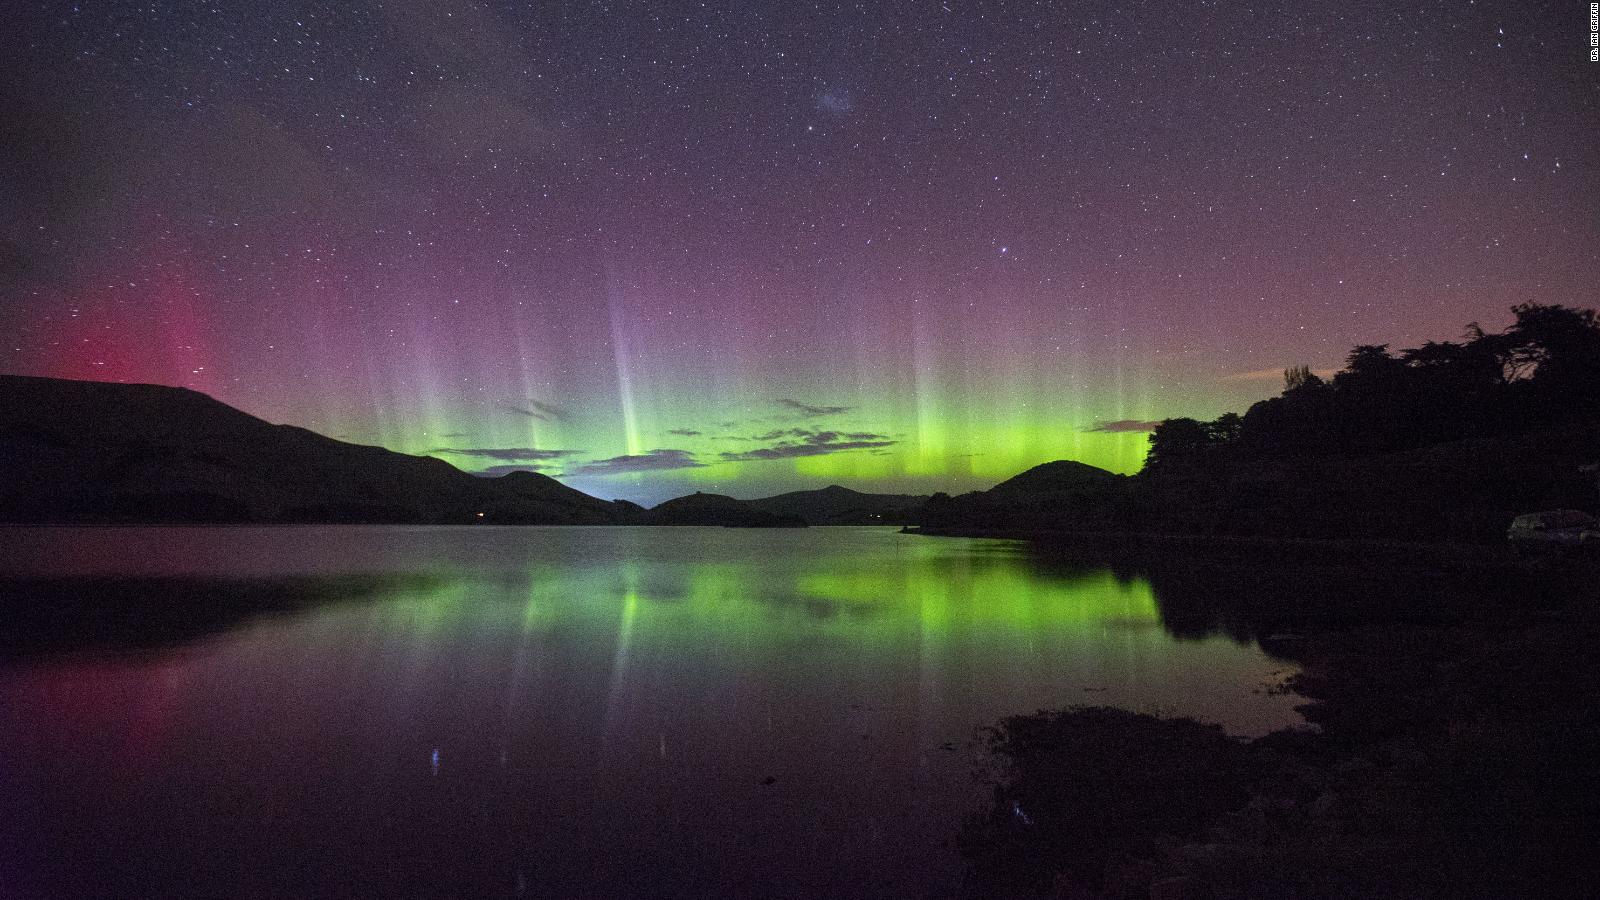 Australians could get a rare glimpse of the southern lights